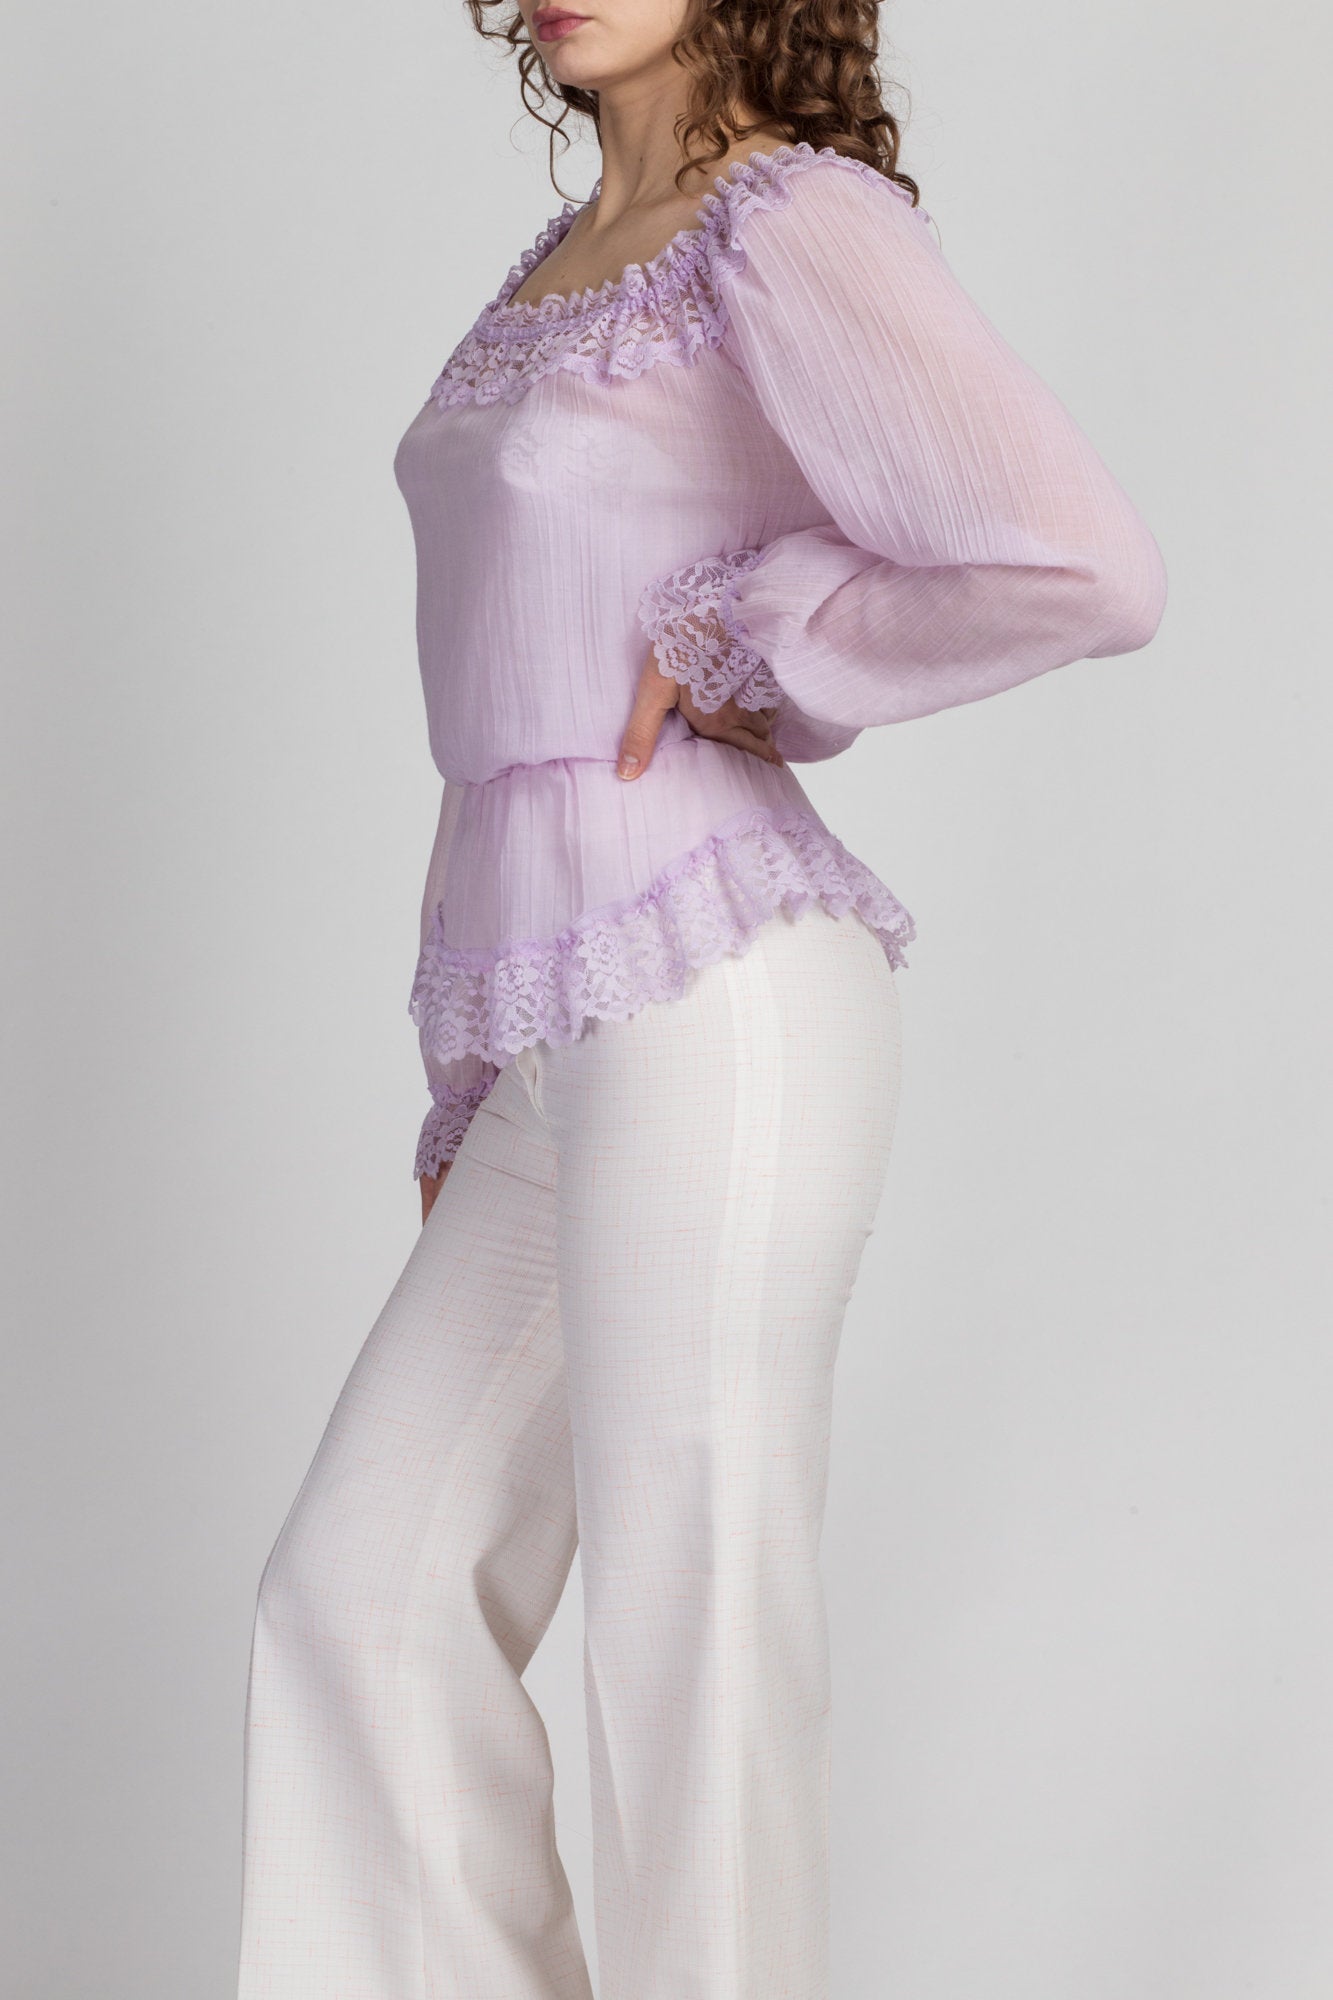 70s Boho Lilac Gauzy Blouse - Small to Large | Vintage Sheer Lace Trim Off-Shoulder Crop Top